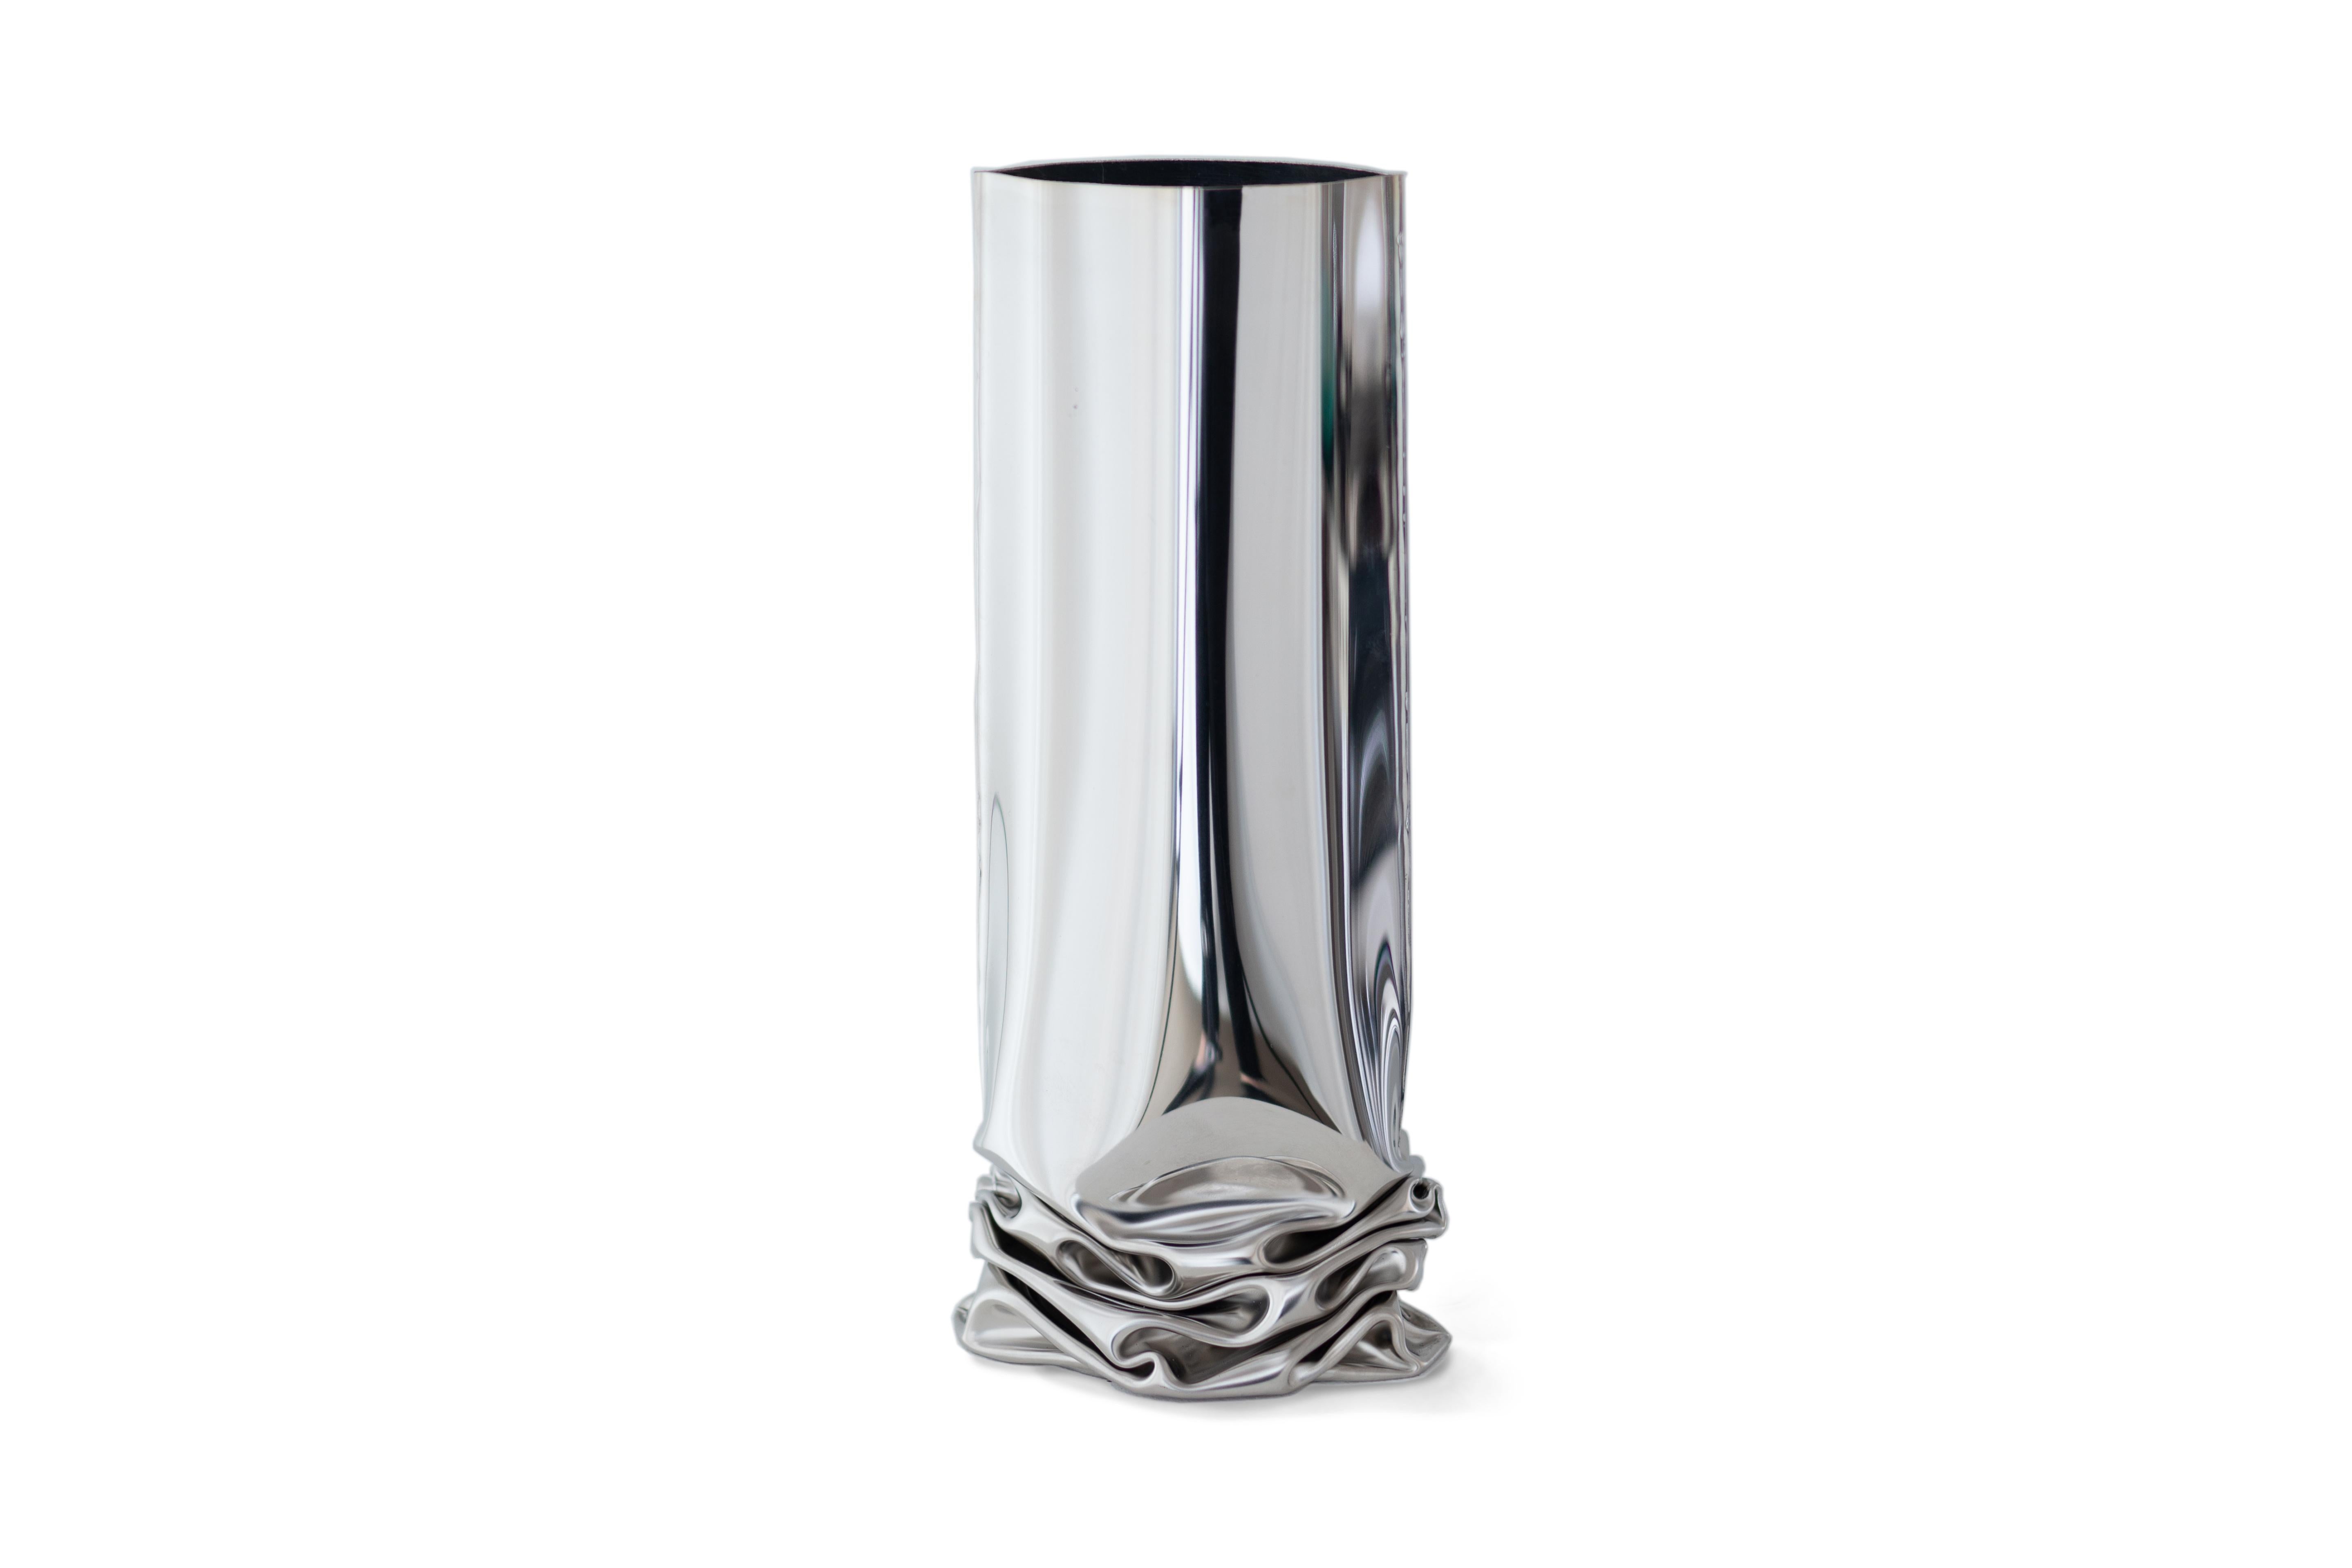 Crash vase 1 by Zieta
Dimensions: H 30 x W 13.5 x D 20 cm.
Materials: polished stainless steel.

Unobtrusive deformation Crash Vases reflect the “controlled loss of control” technique. The vases embrace the notion of deformation.
Grouped